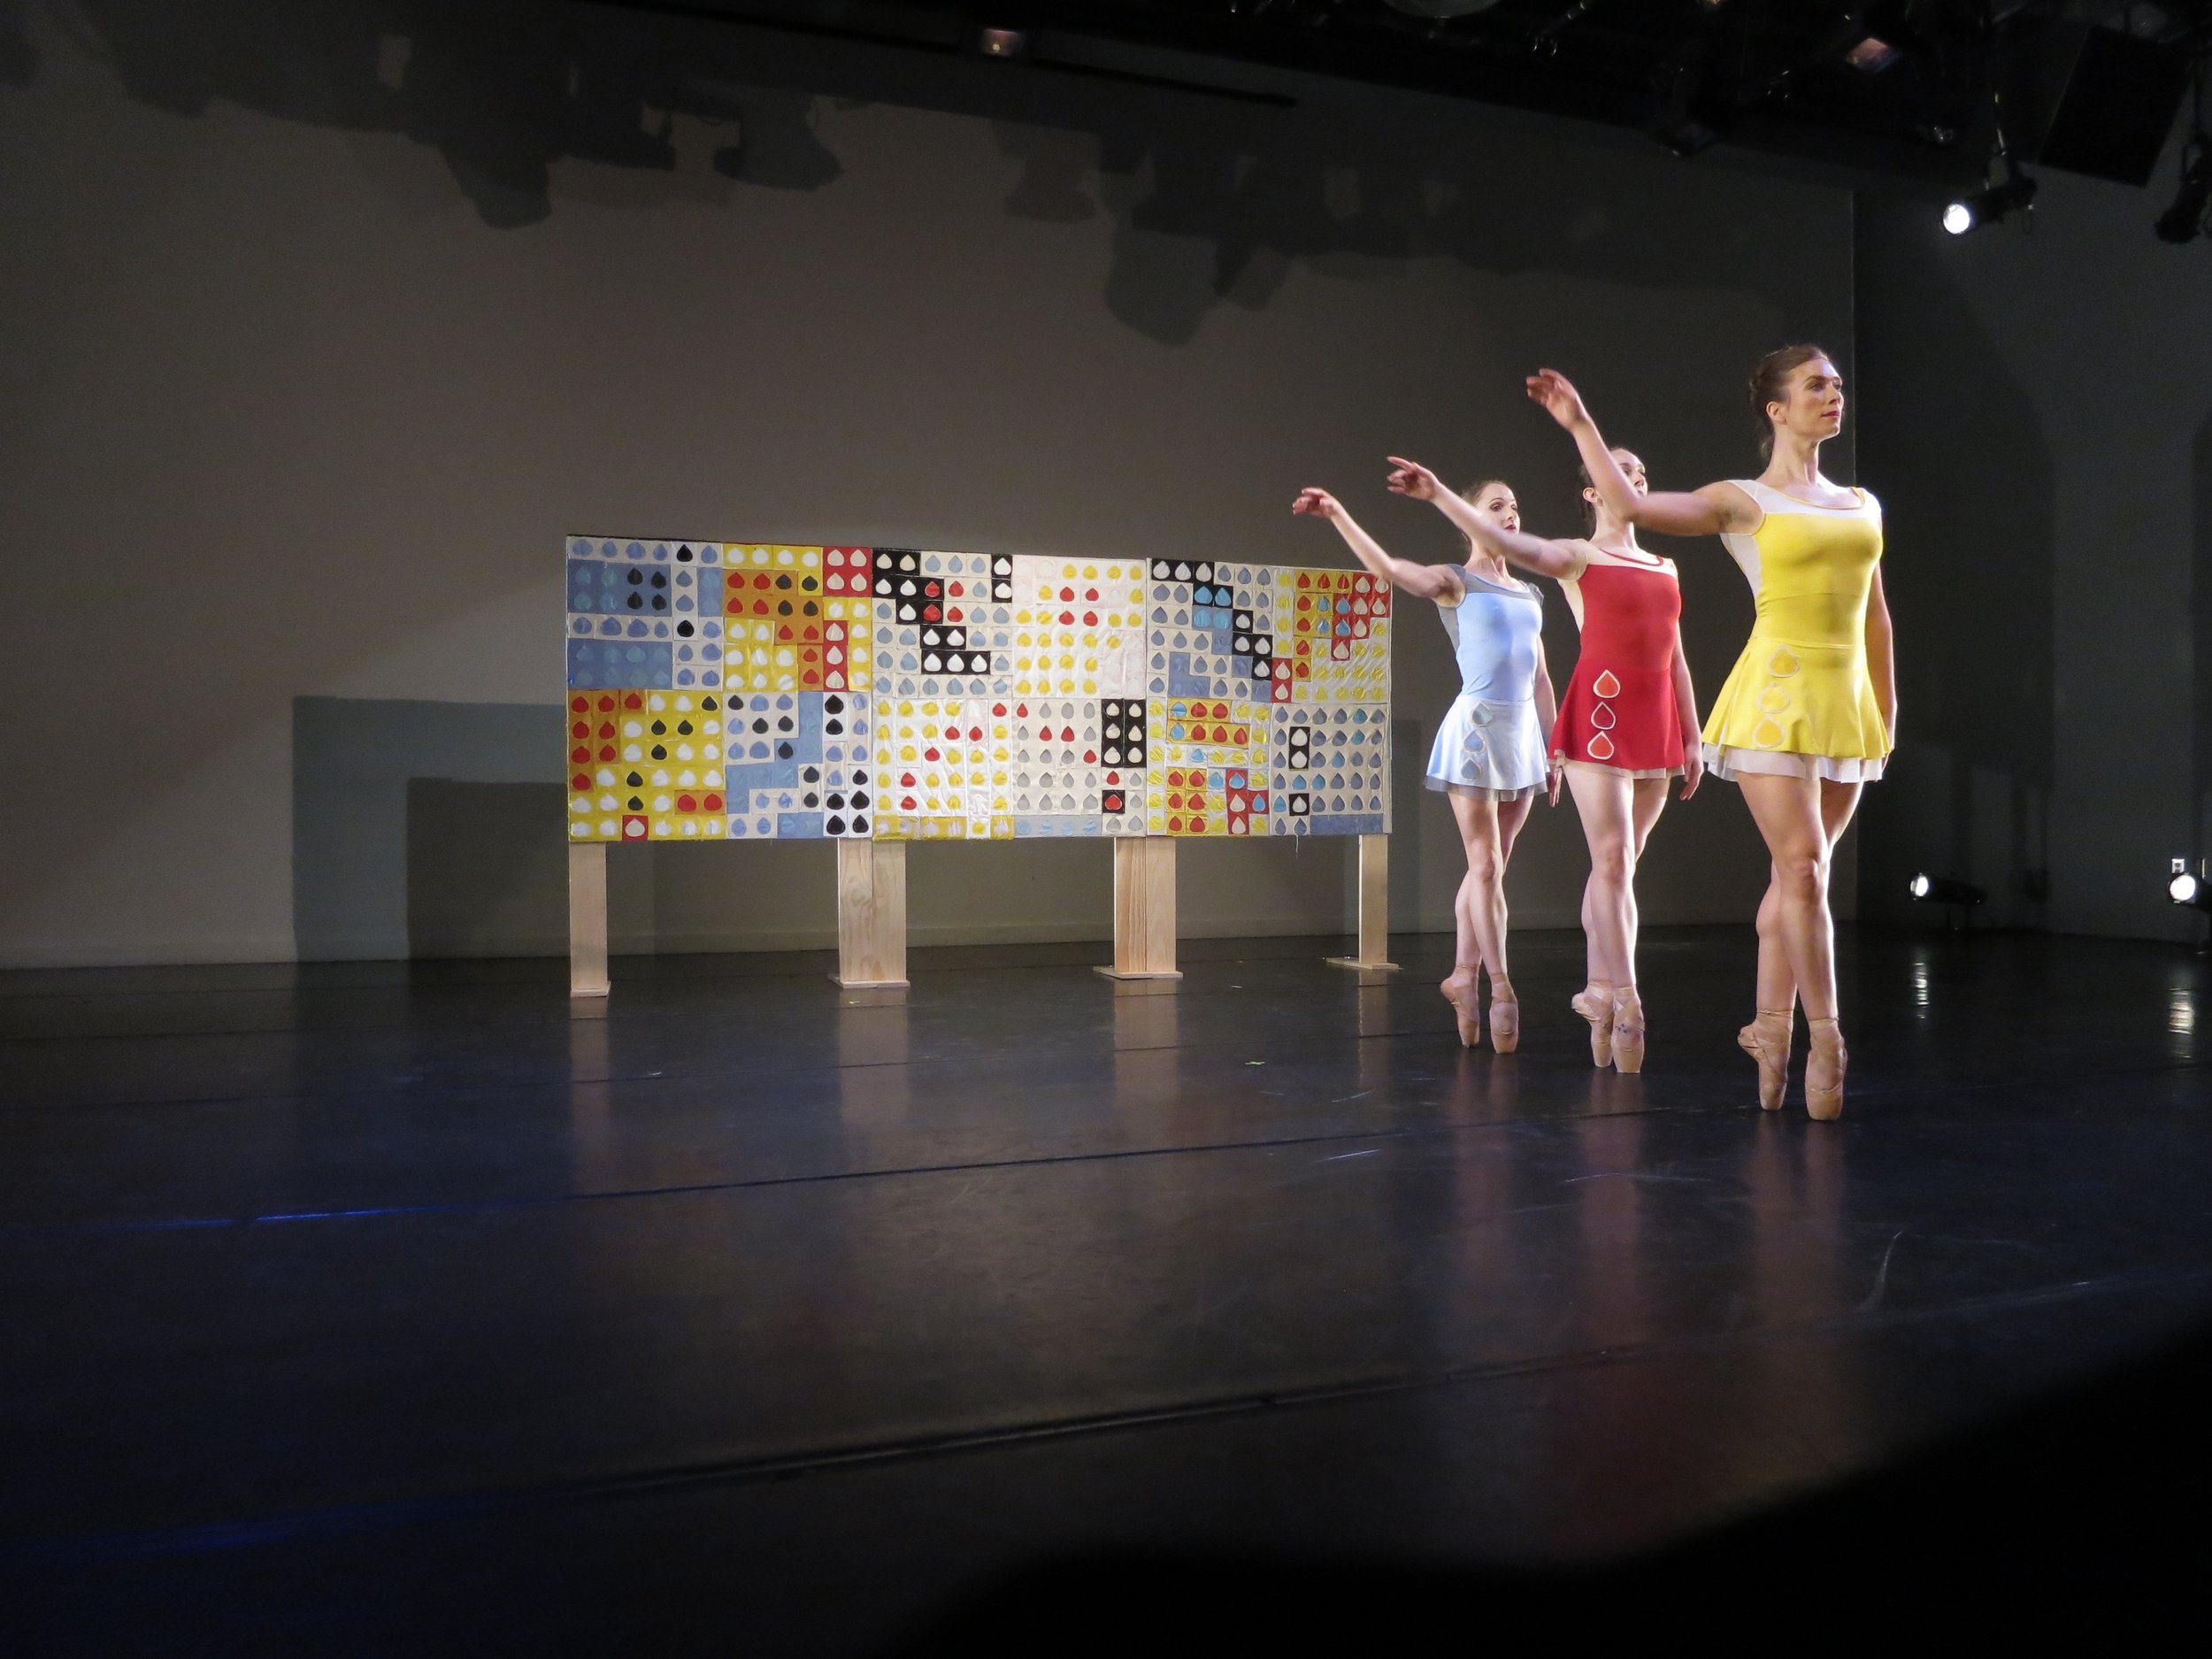  ”Colorplay” by choreographer Brenda R. Neville in collaboration with visual artist Courtney Puckett 